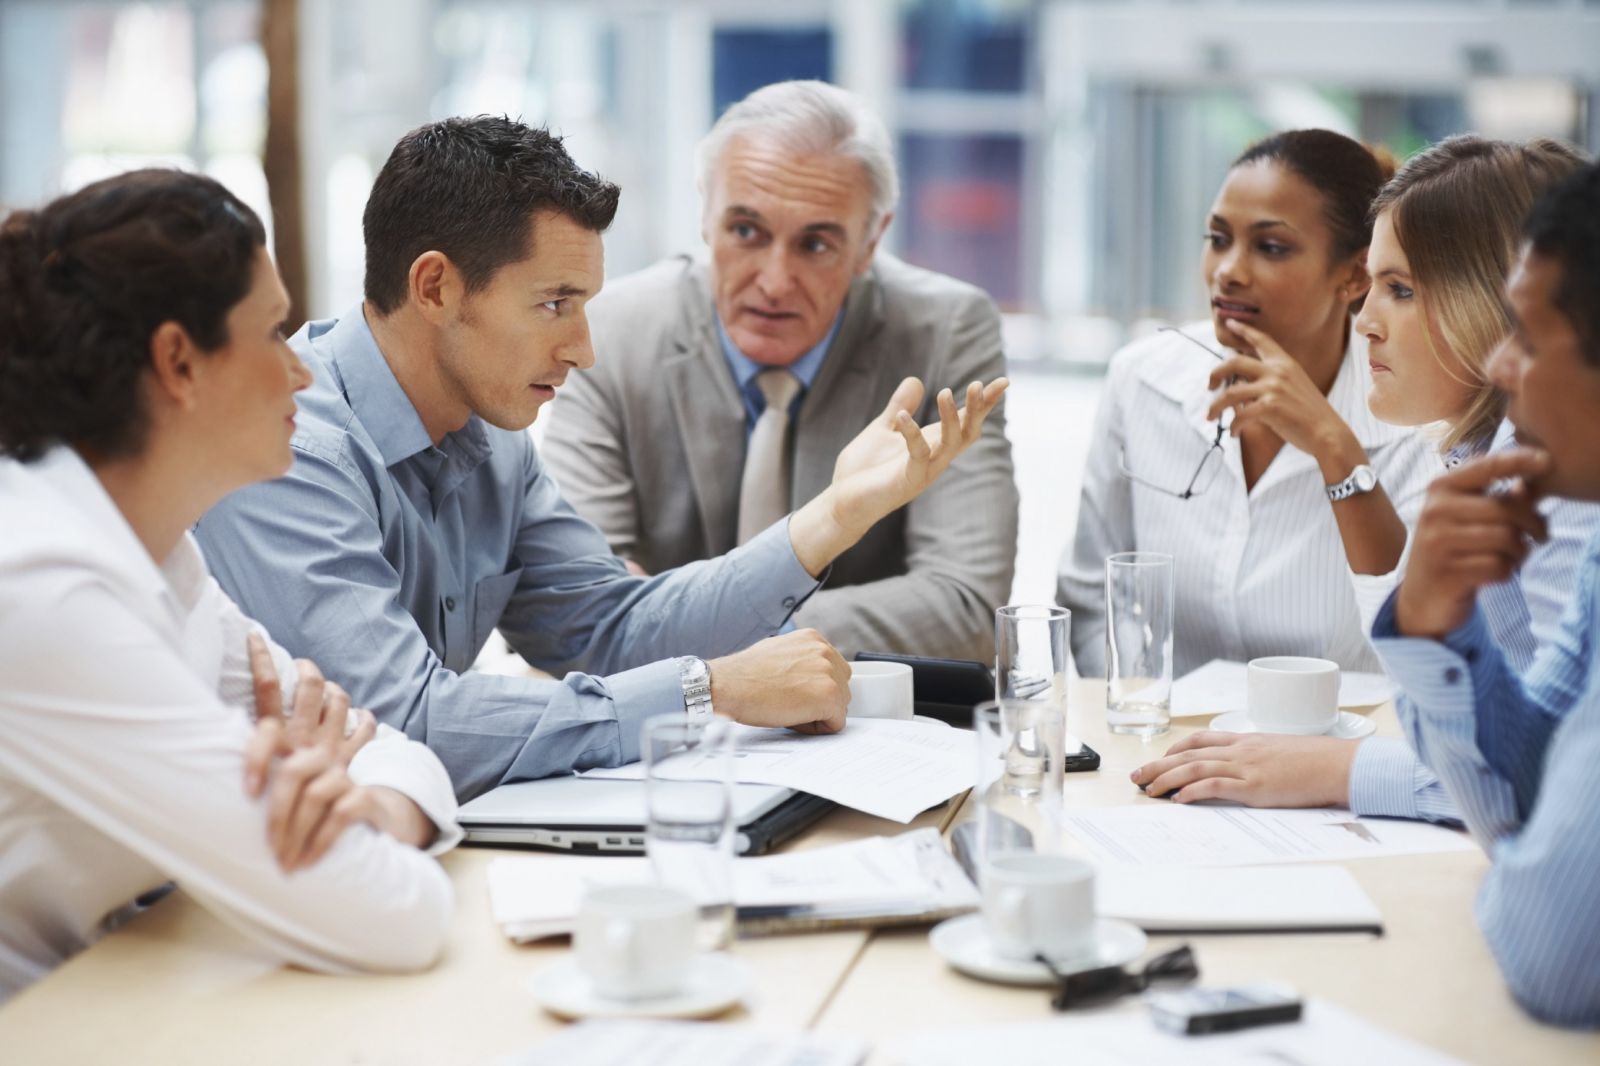 10+ effective meeting management skills from A-Z for leaders